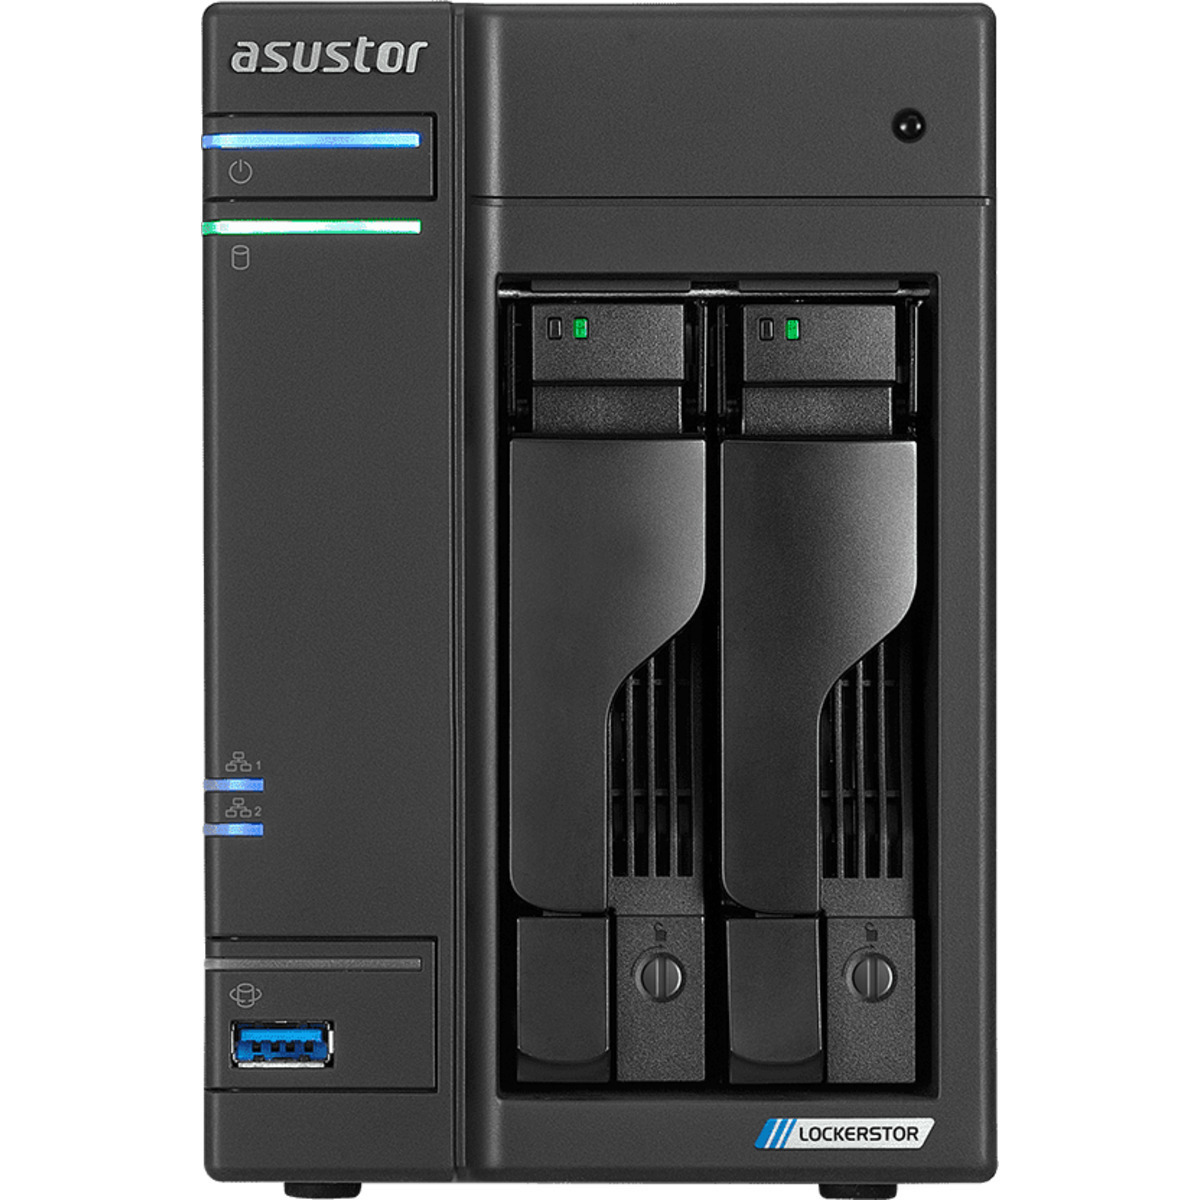 ASUSTOR AS6602T Lockerstor 2 48tb 2-Bay Desktop Multimedia / Power User / Business NAS - Network Attached Storage Device 2x24tb Seagate EXOS X24 ST24000NM002H 3.5 7200rpm SATA 6Gb/s HDD ENTERPRISE Class Drives Installed - Burn-In Tested - FREE RAM UPGRADE AS6602T Lockerstor 2